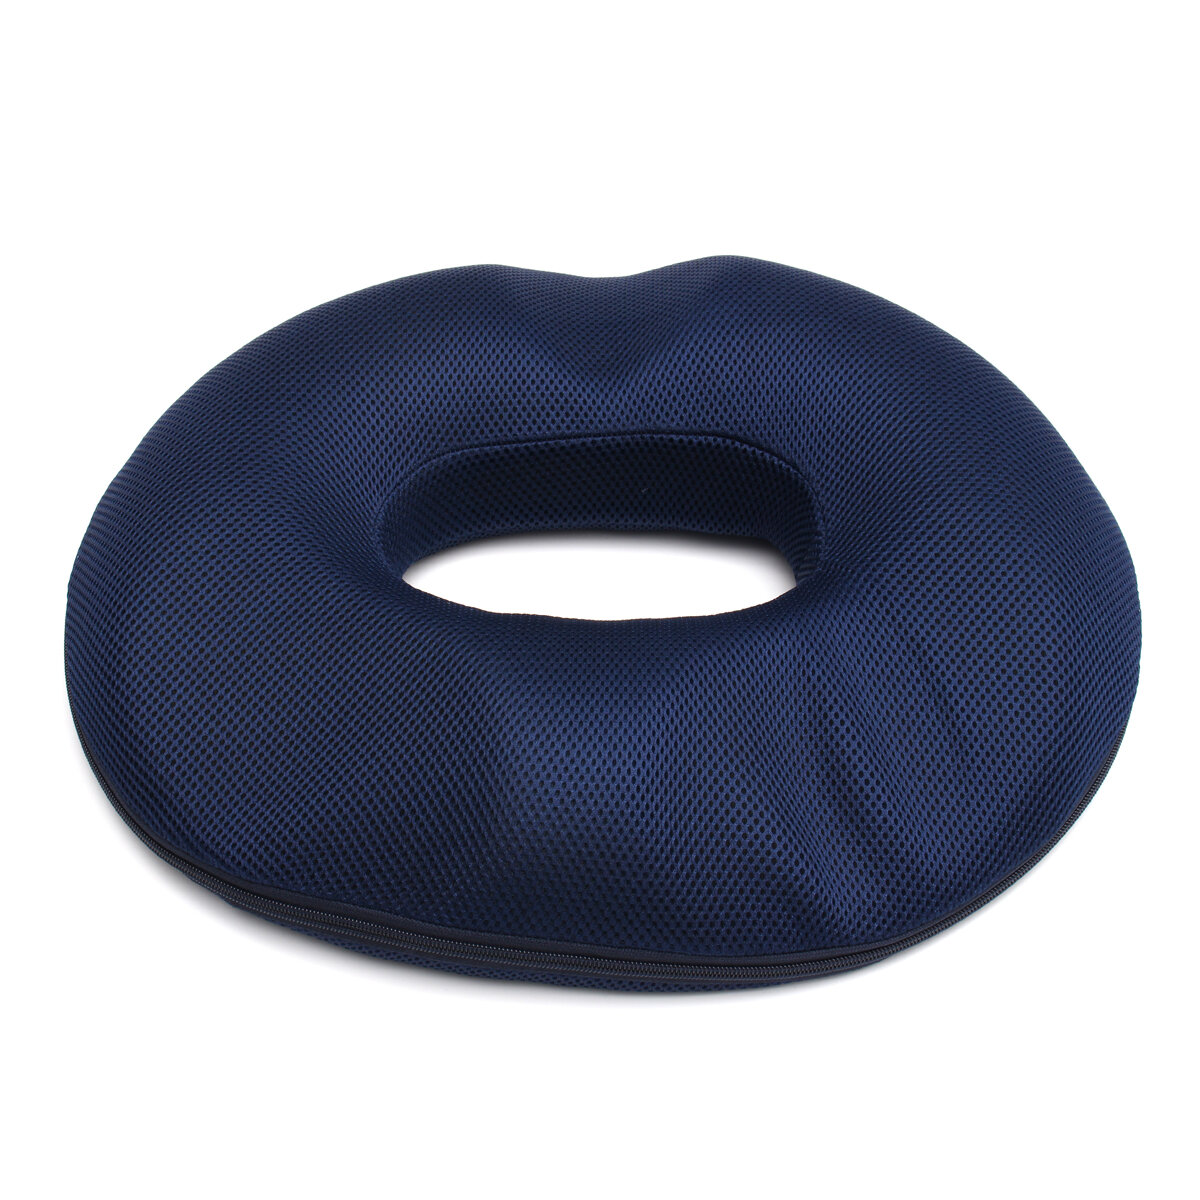 

Memory Foam Seat Cushion Travel Orthopedic Coccyx Protection Chair Car Pad Round Breathable Mesh Massage Hip Cushion